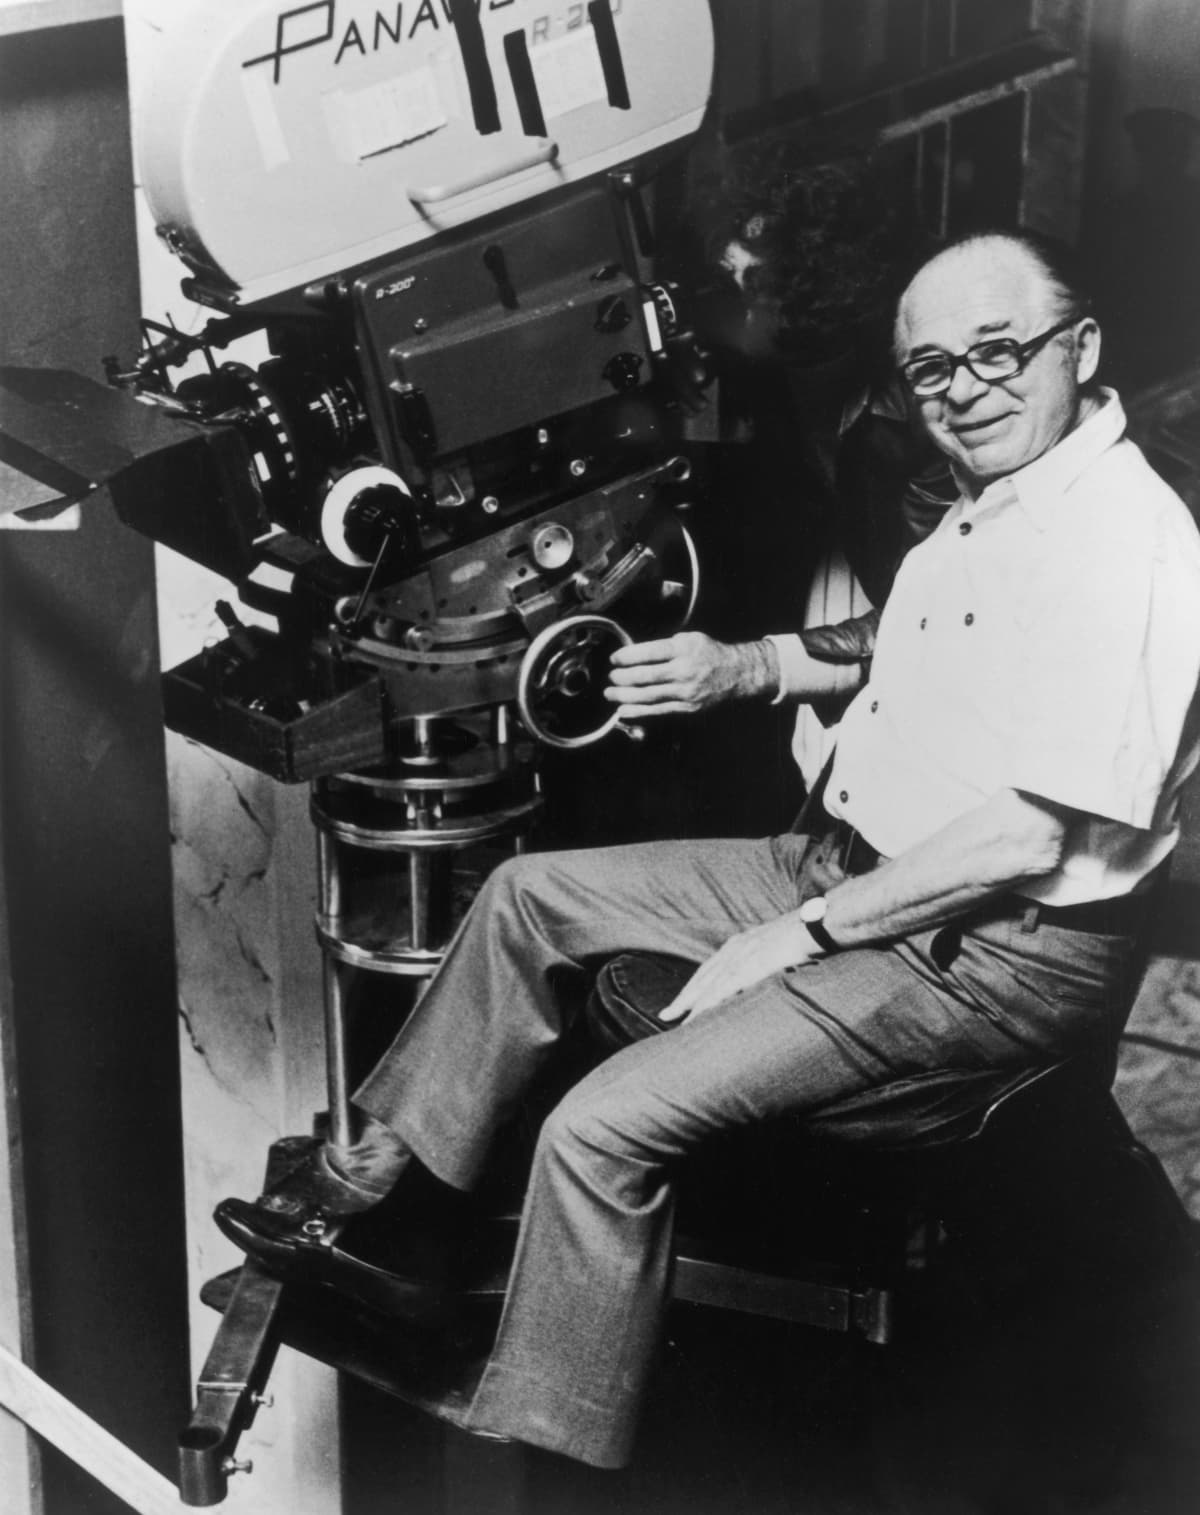 circa 1965:  Austrian-Hungarian-born director Billy Wilder (1906 - 2002) smiles while sitting in front of a cameraman on one of his film sets. The cameraman looks through the viewfinder on a Panavision motion picture camera.  (Photo by Hulton Archive/Getty Images)